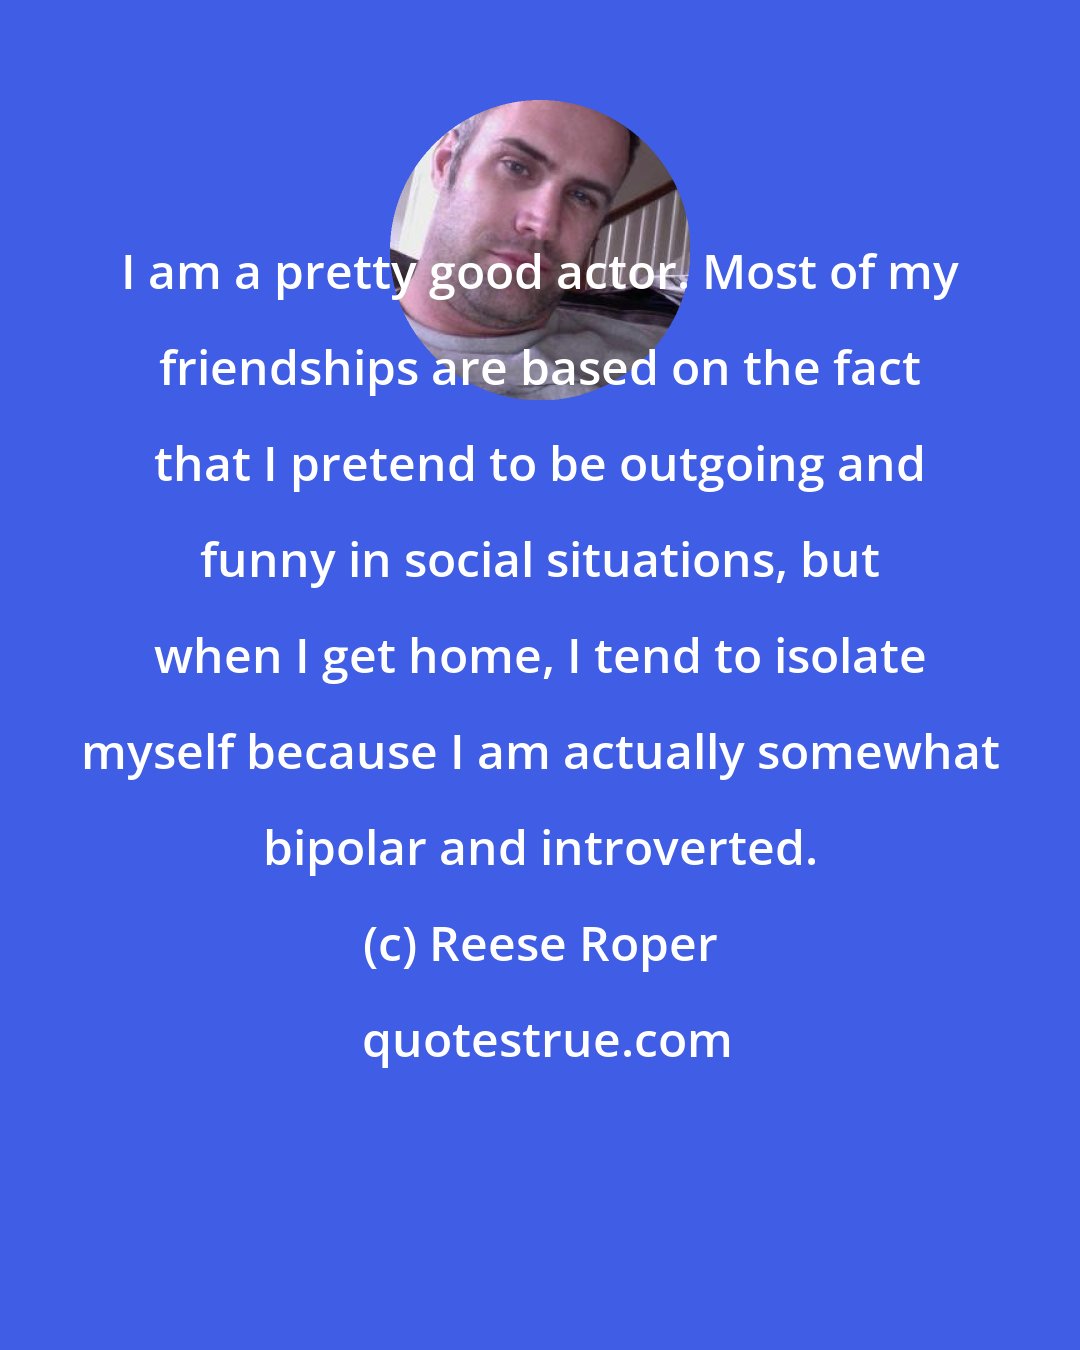 Reese Roper: I am a pretty good actor. Most of my friendships are based on the fact that I pretend to be outgoing and funny in social situations, but when I get home, I tend to isolate myself because I am actually somewhat bipolar and introverted.